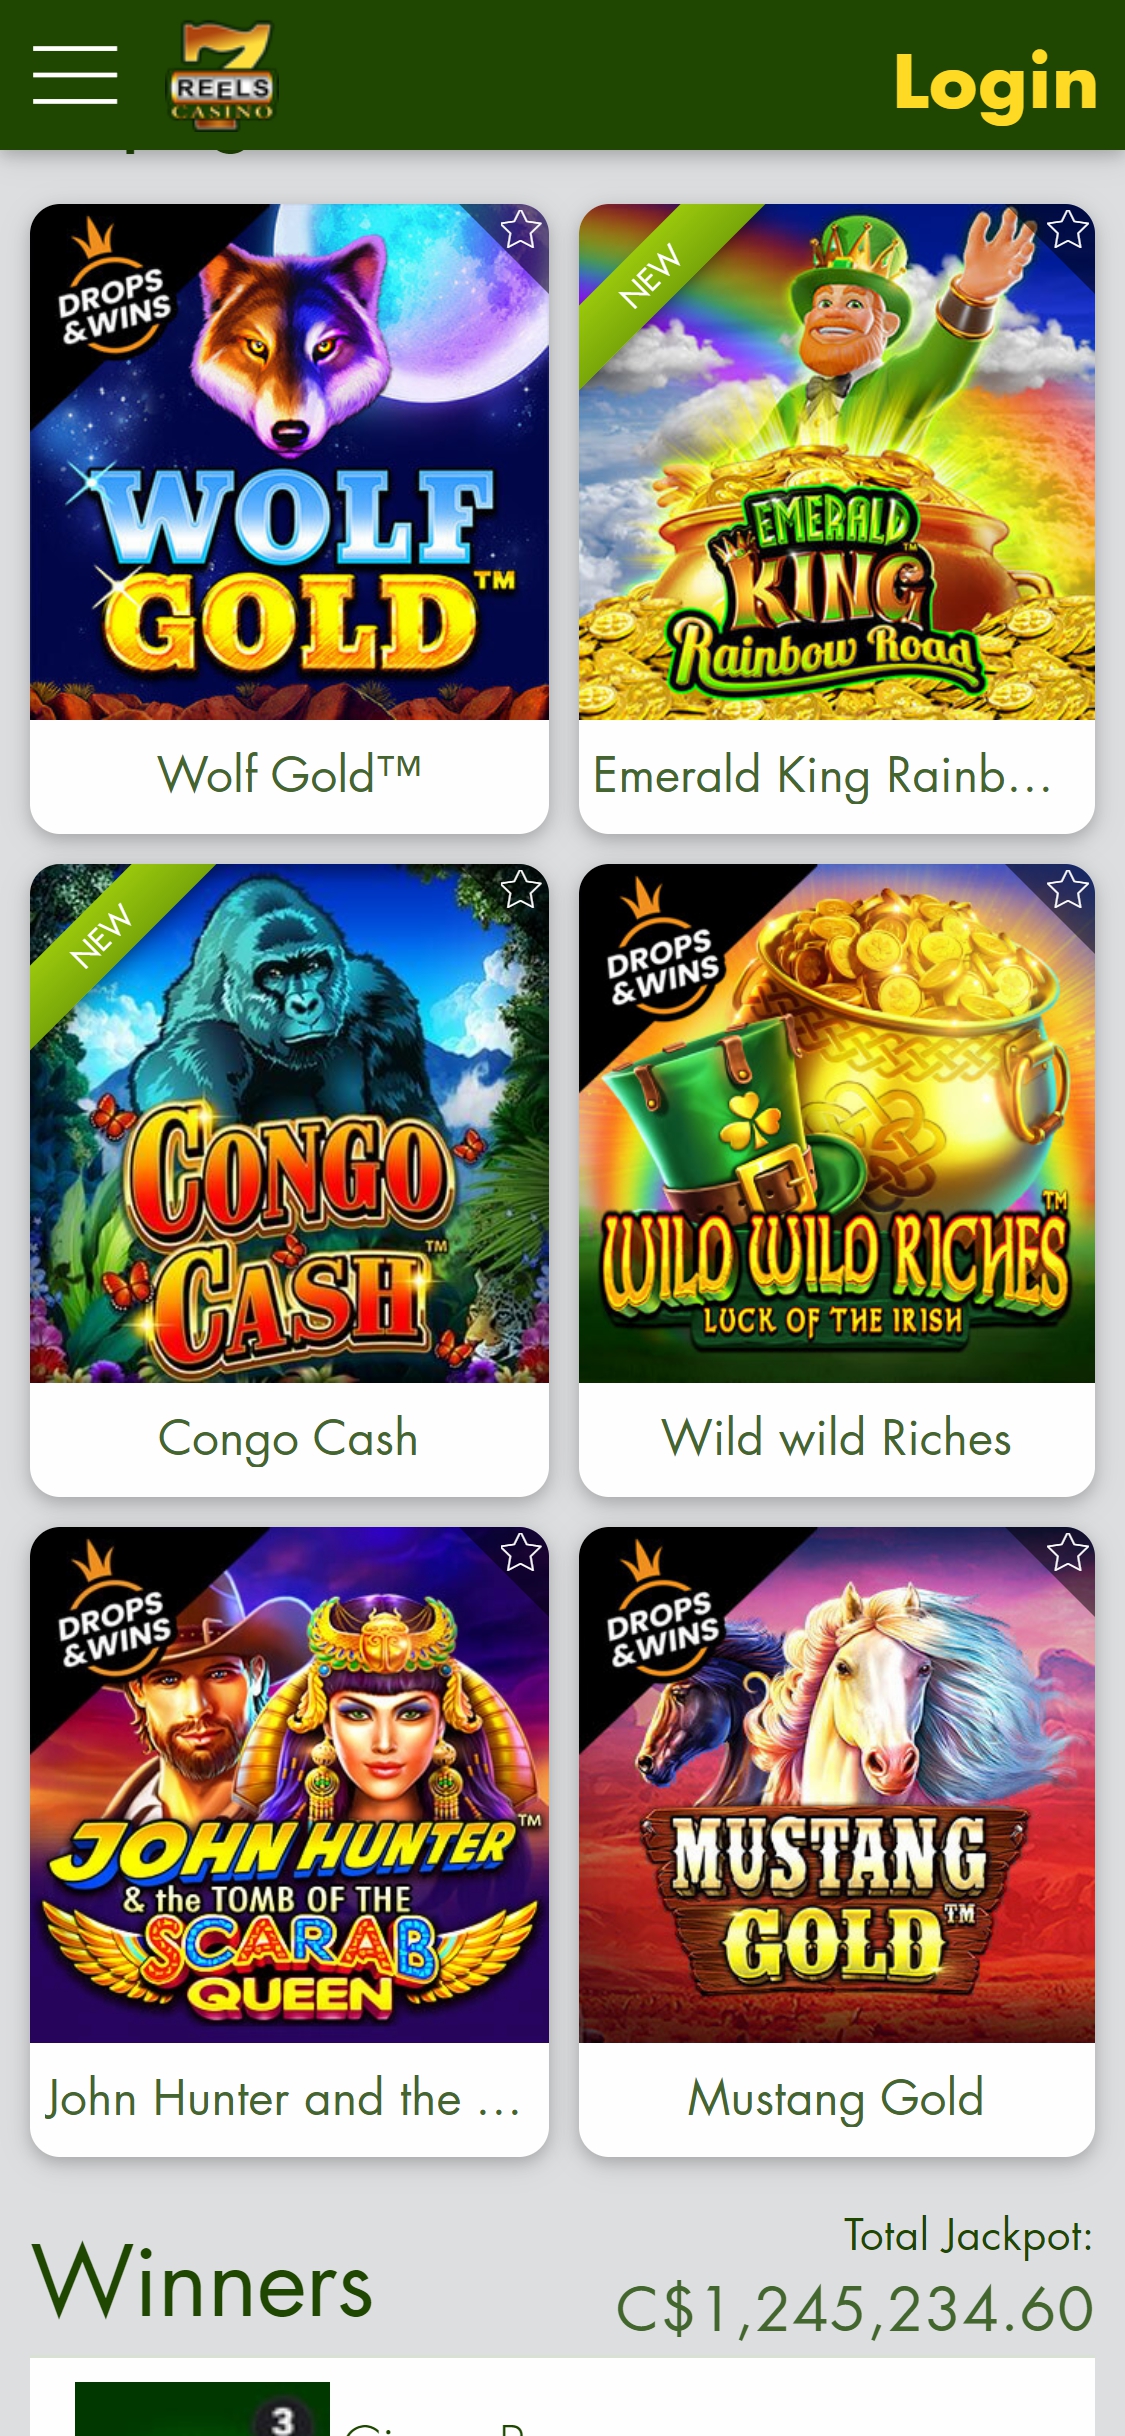 7Reels Casino Mobile Games Review